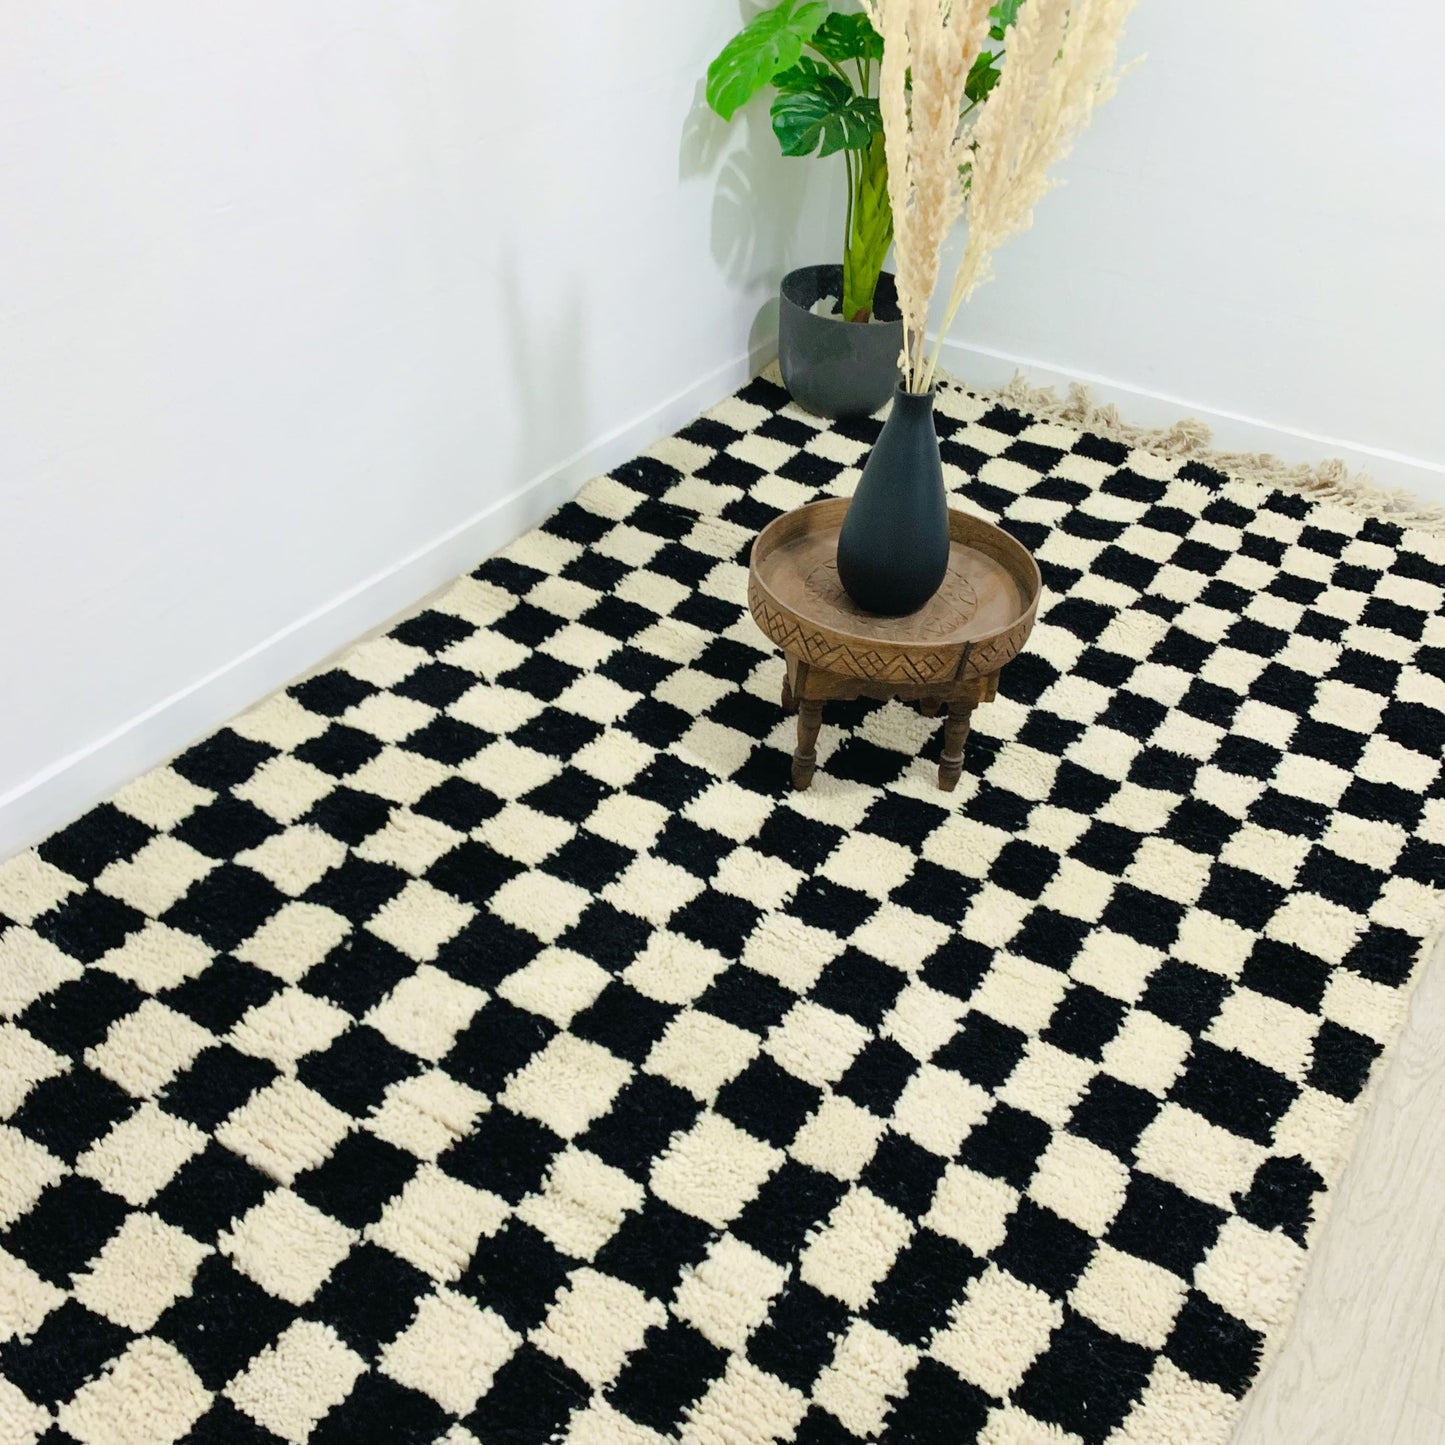 moroccan-black-and-white-checkered-rug-in-kitchen-in-new-york-apartment-usa